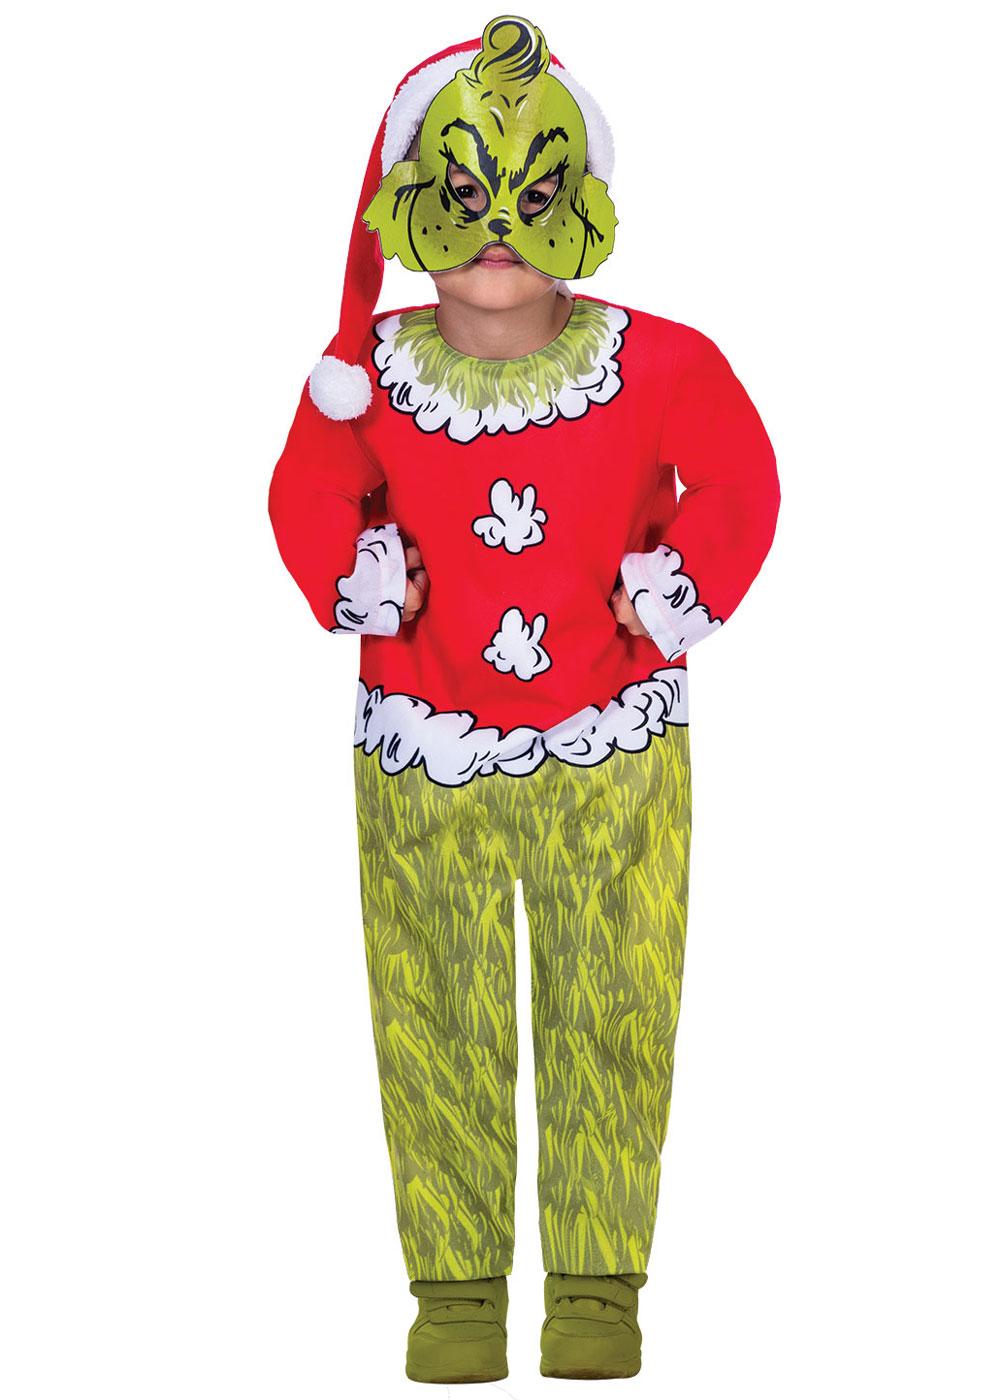 The Grinch Fancy Dress Cosume for Kids by Amscan 9902403 9902404 and 9902405 available here at Karnival Costumes online party shop